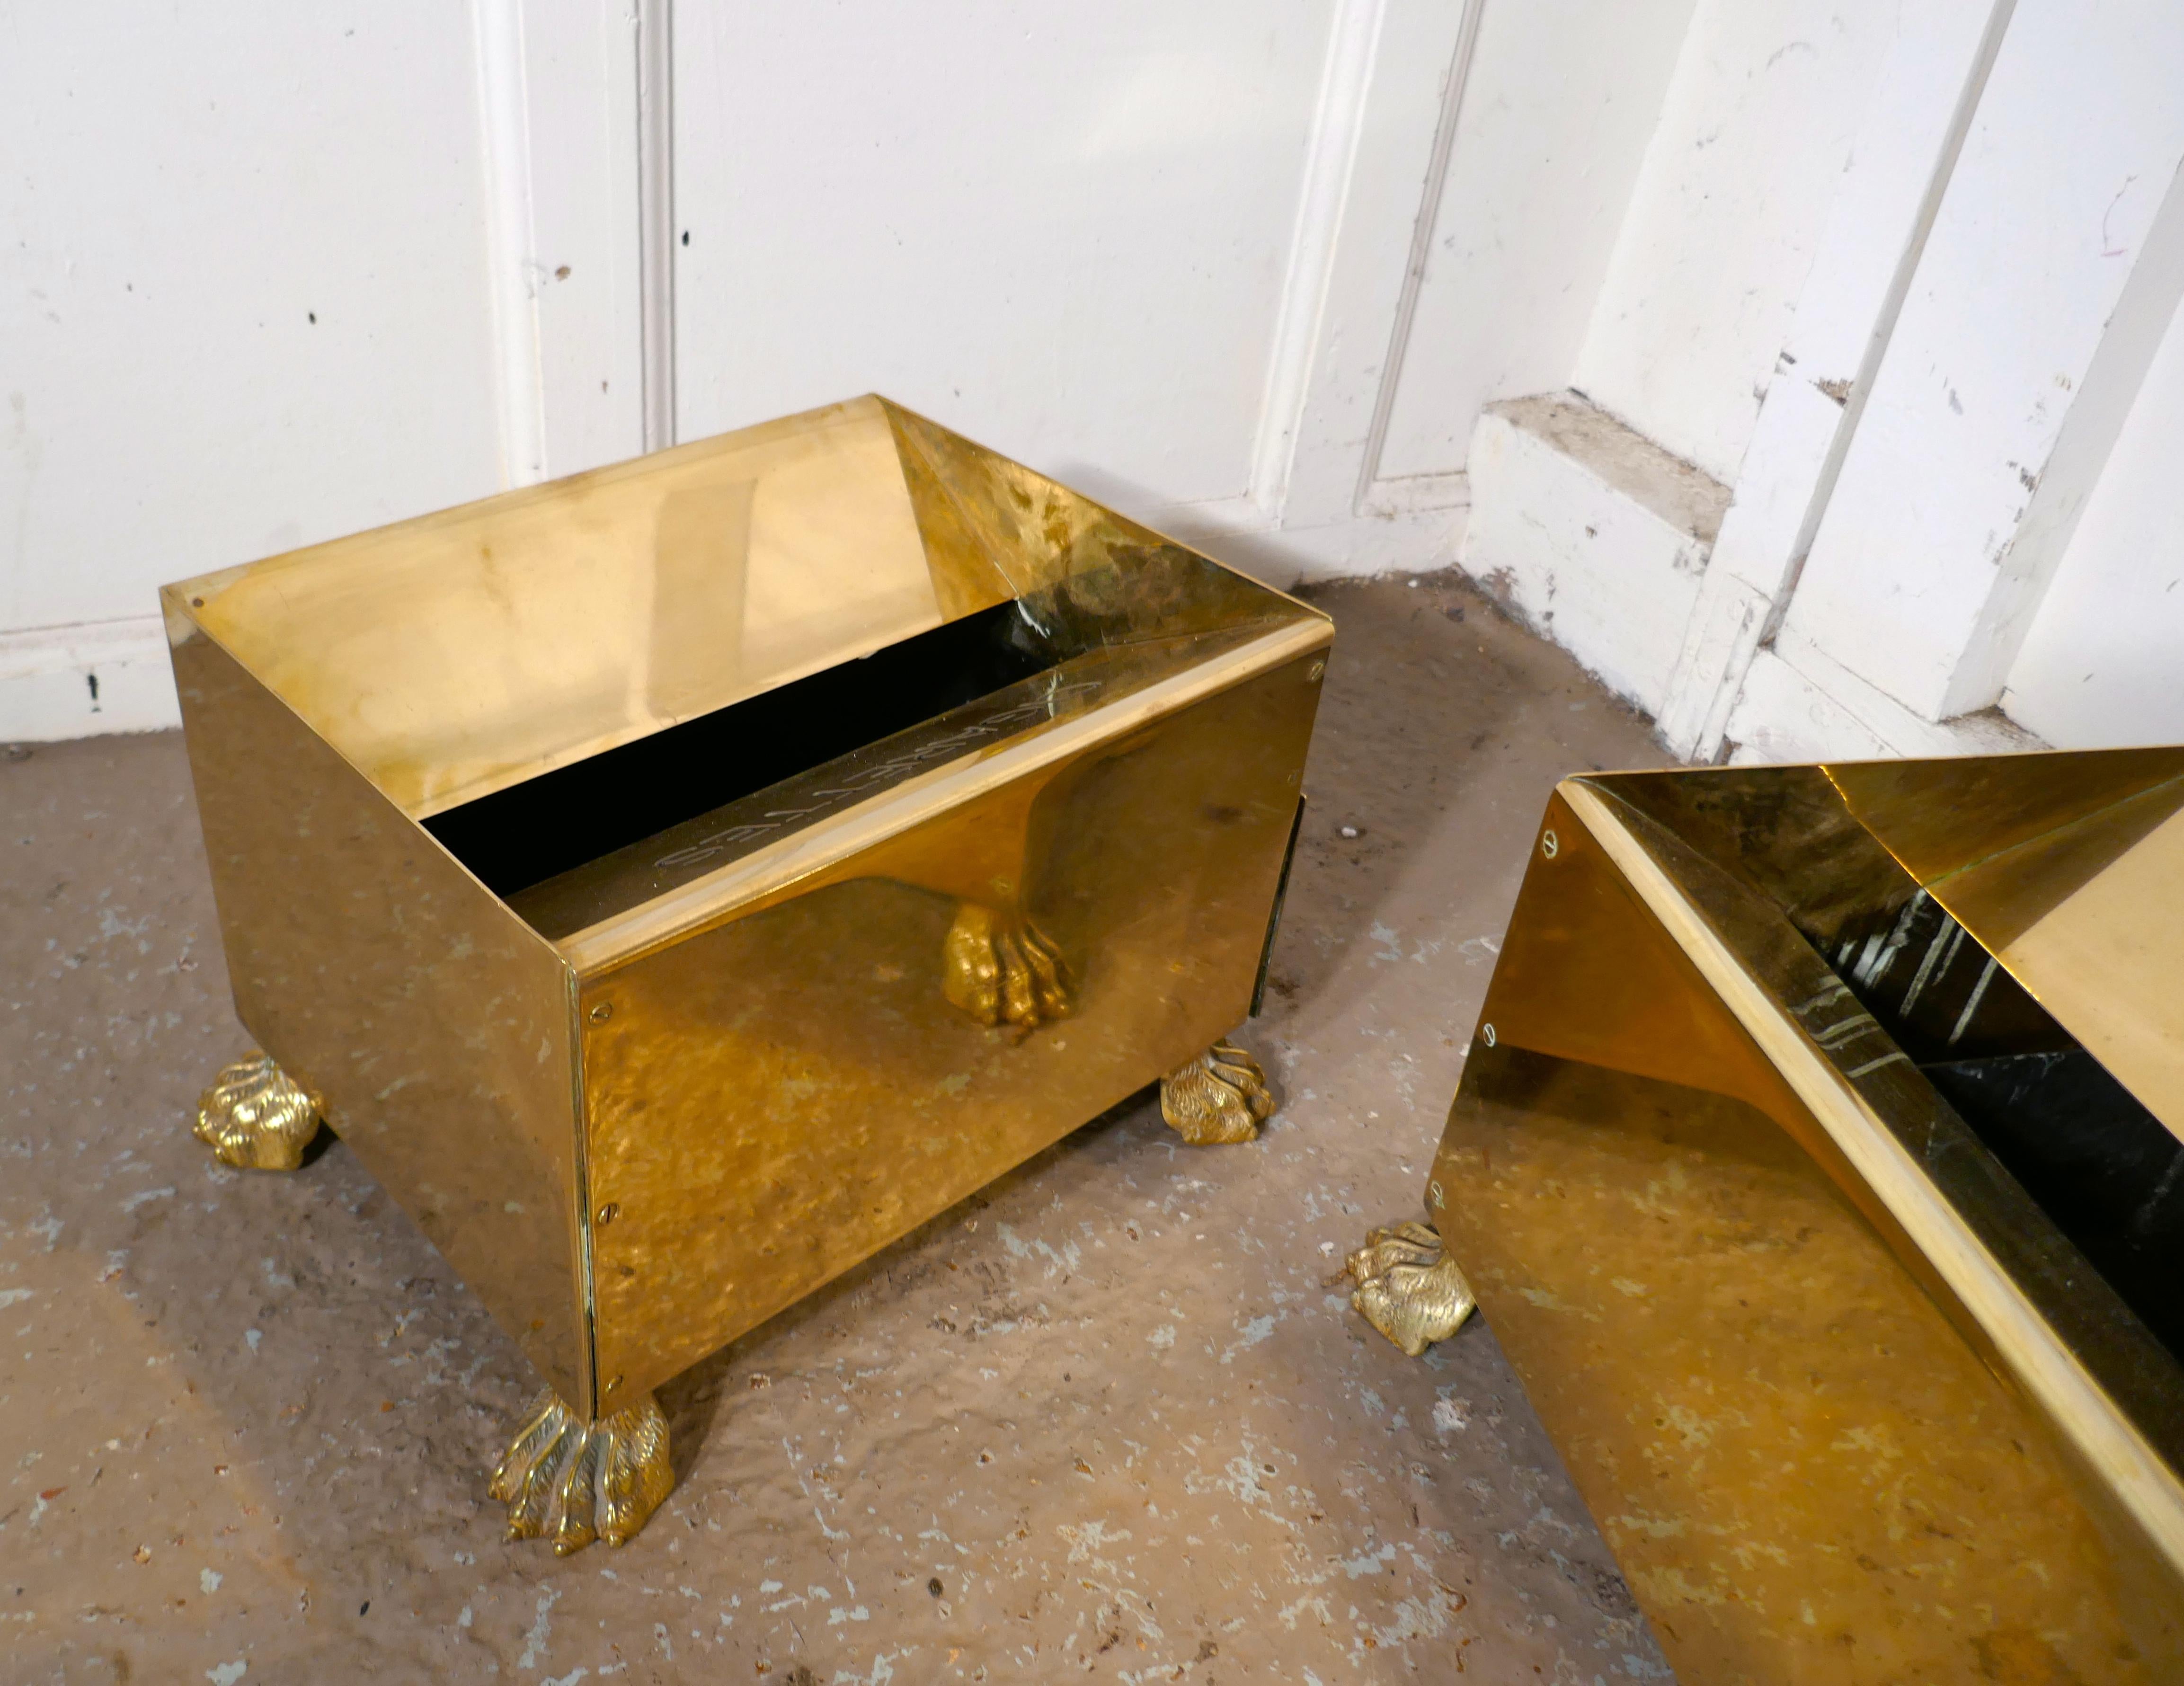 Set of 4 Art Deco vintage brass hotel floor ash trays

A rare find a set of 4 solid brass floor ashtrays, the trays have CIGARETTES embossed on one side, they each stand on lions paw feet and they have an ash pan drawer on the side for ease of